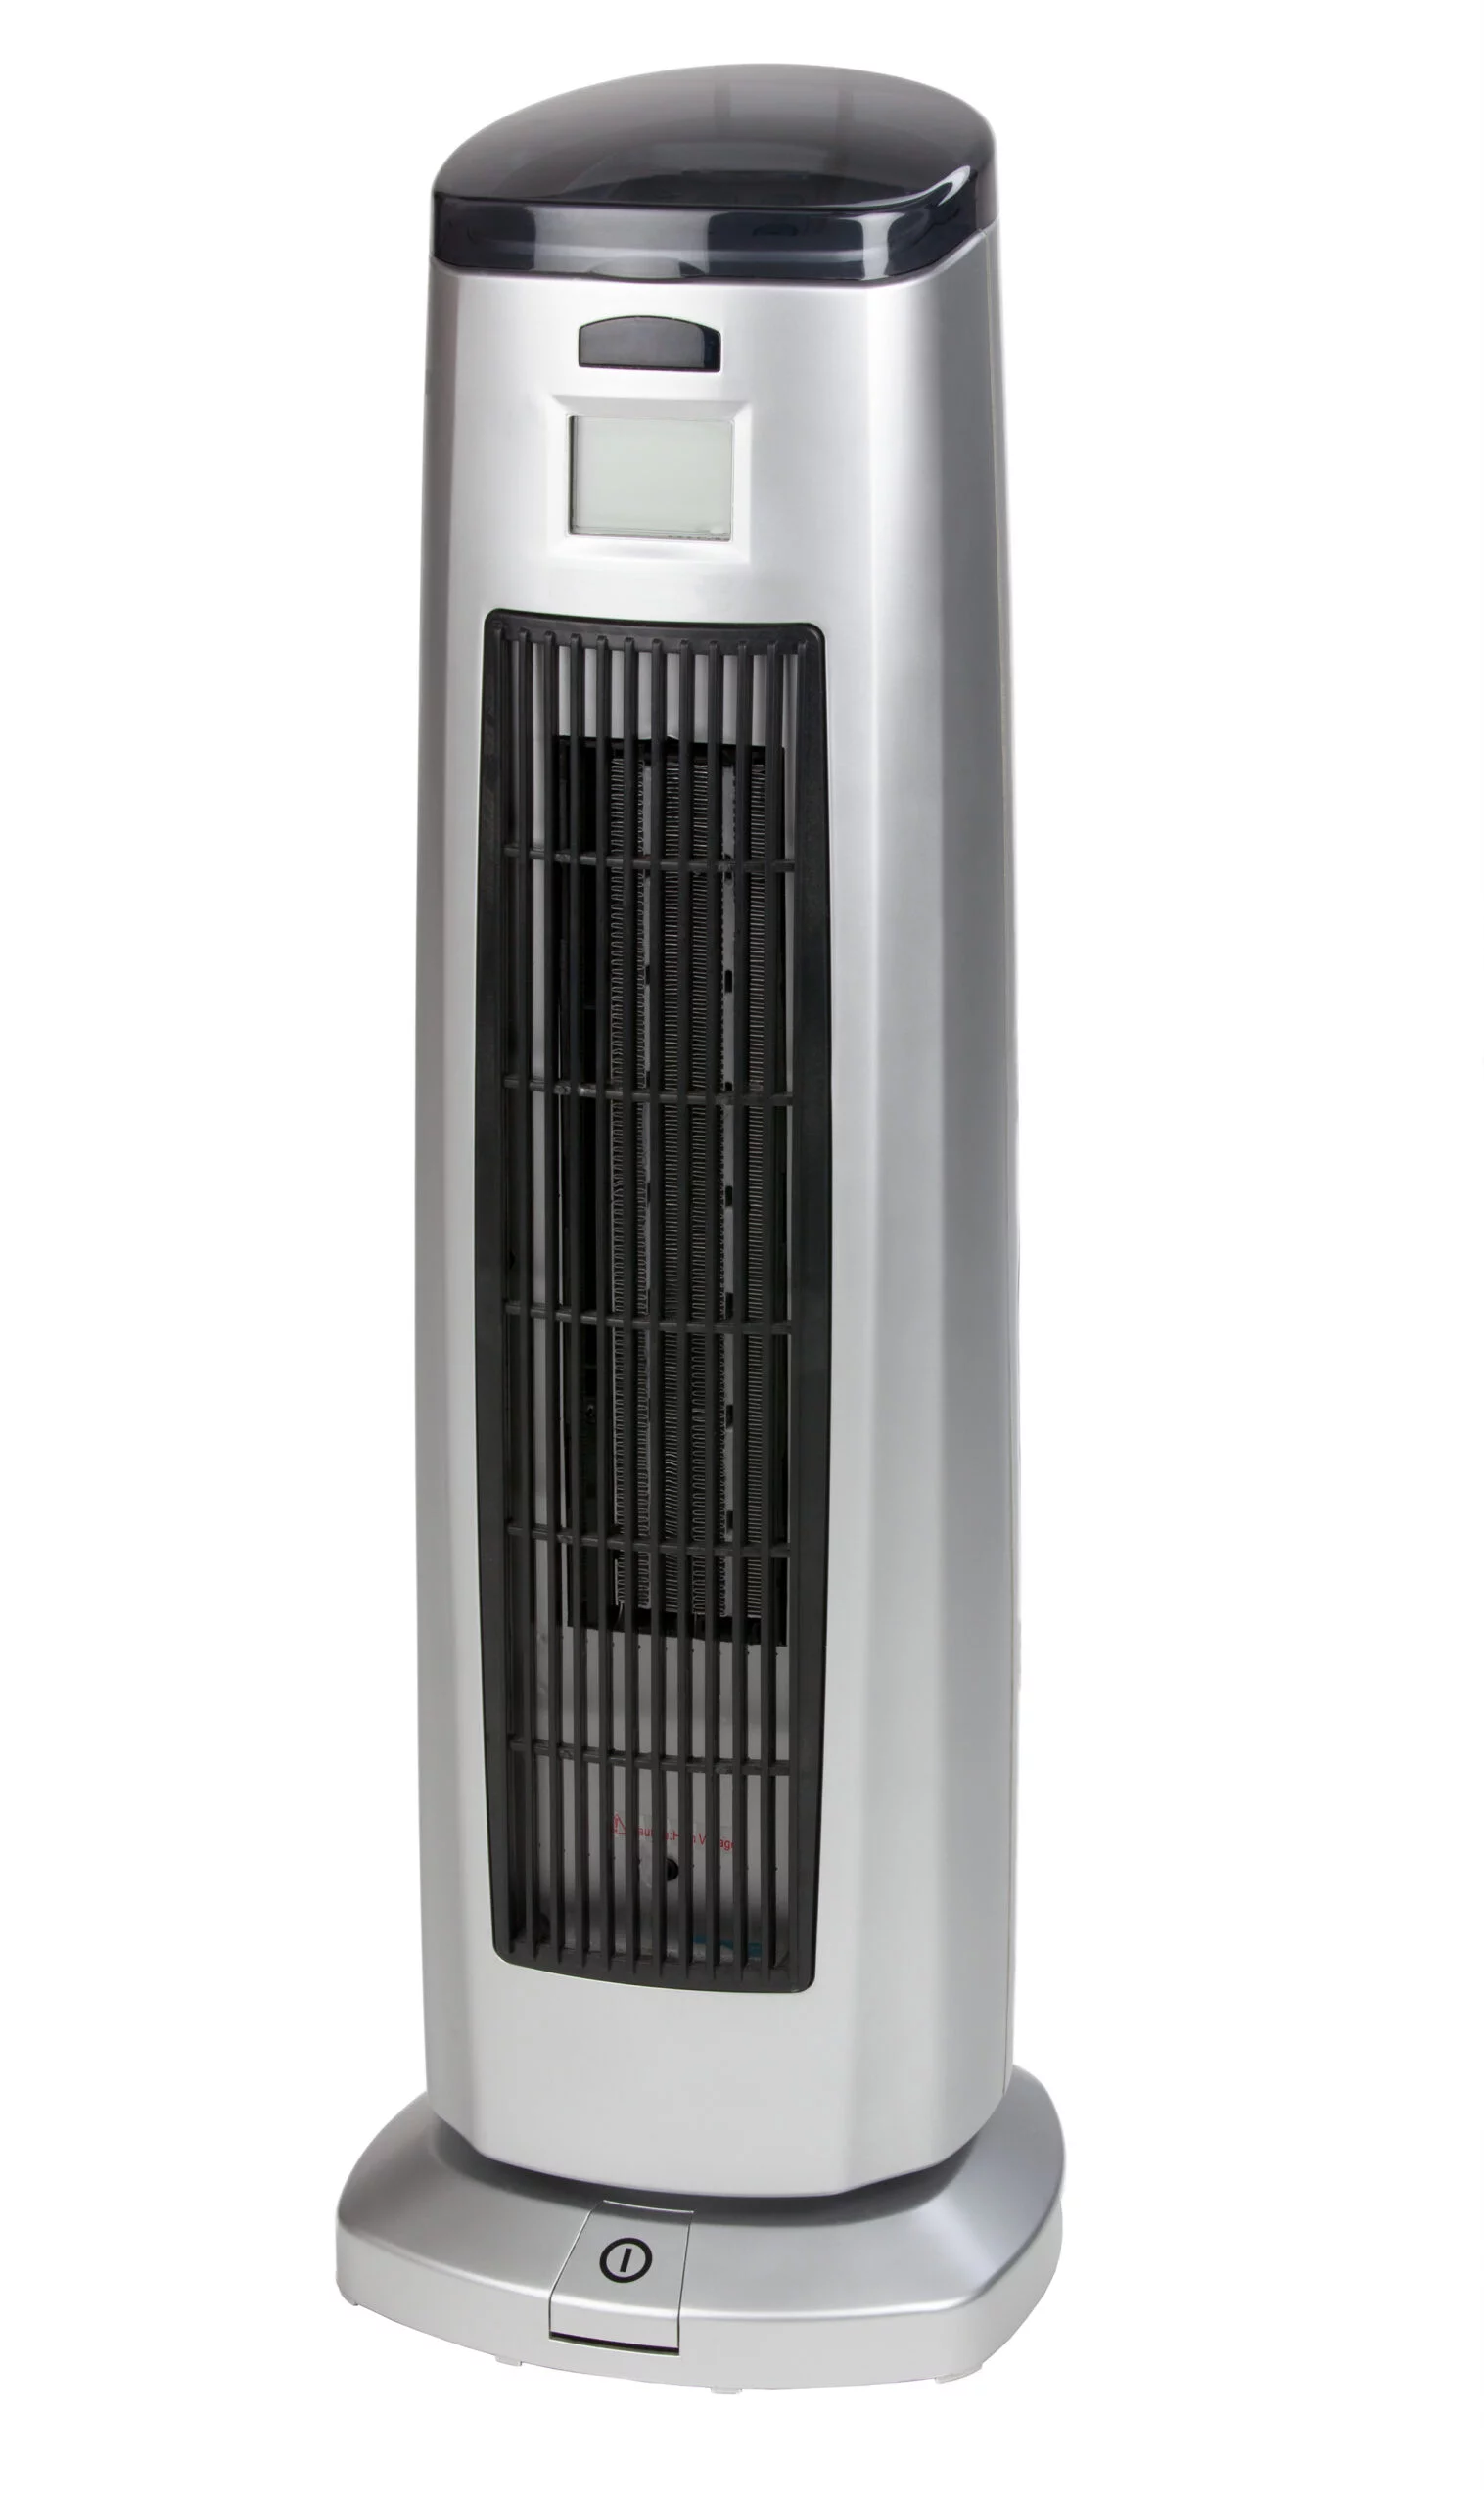 Electric heater on white background.